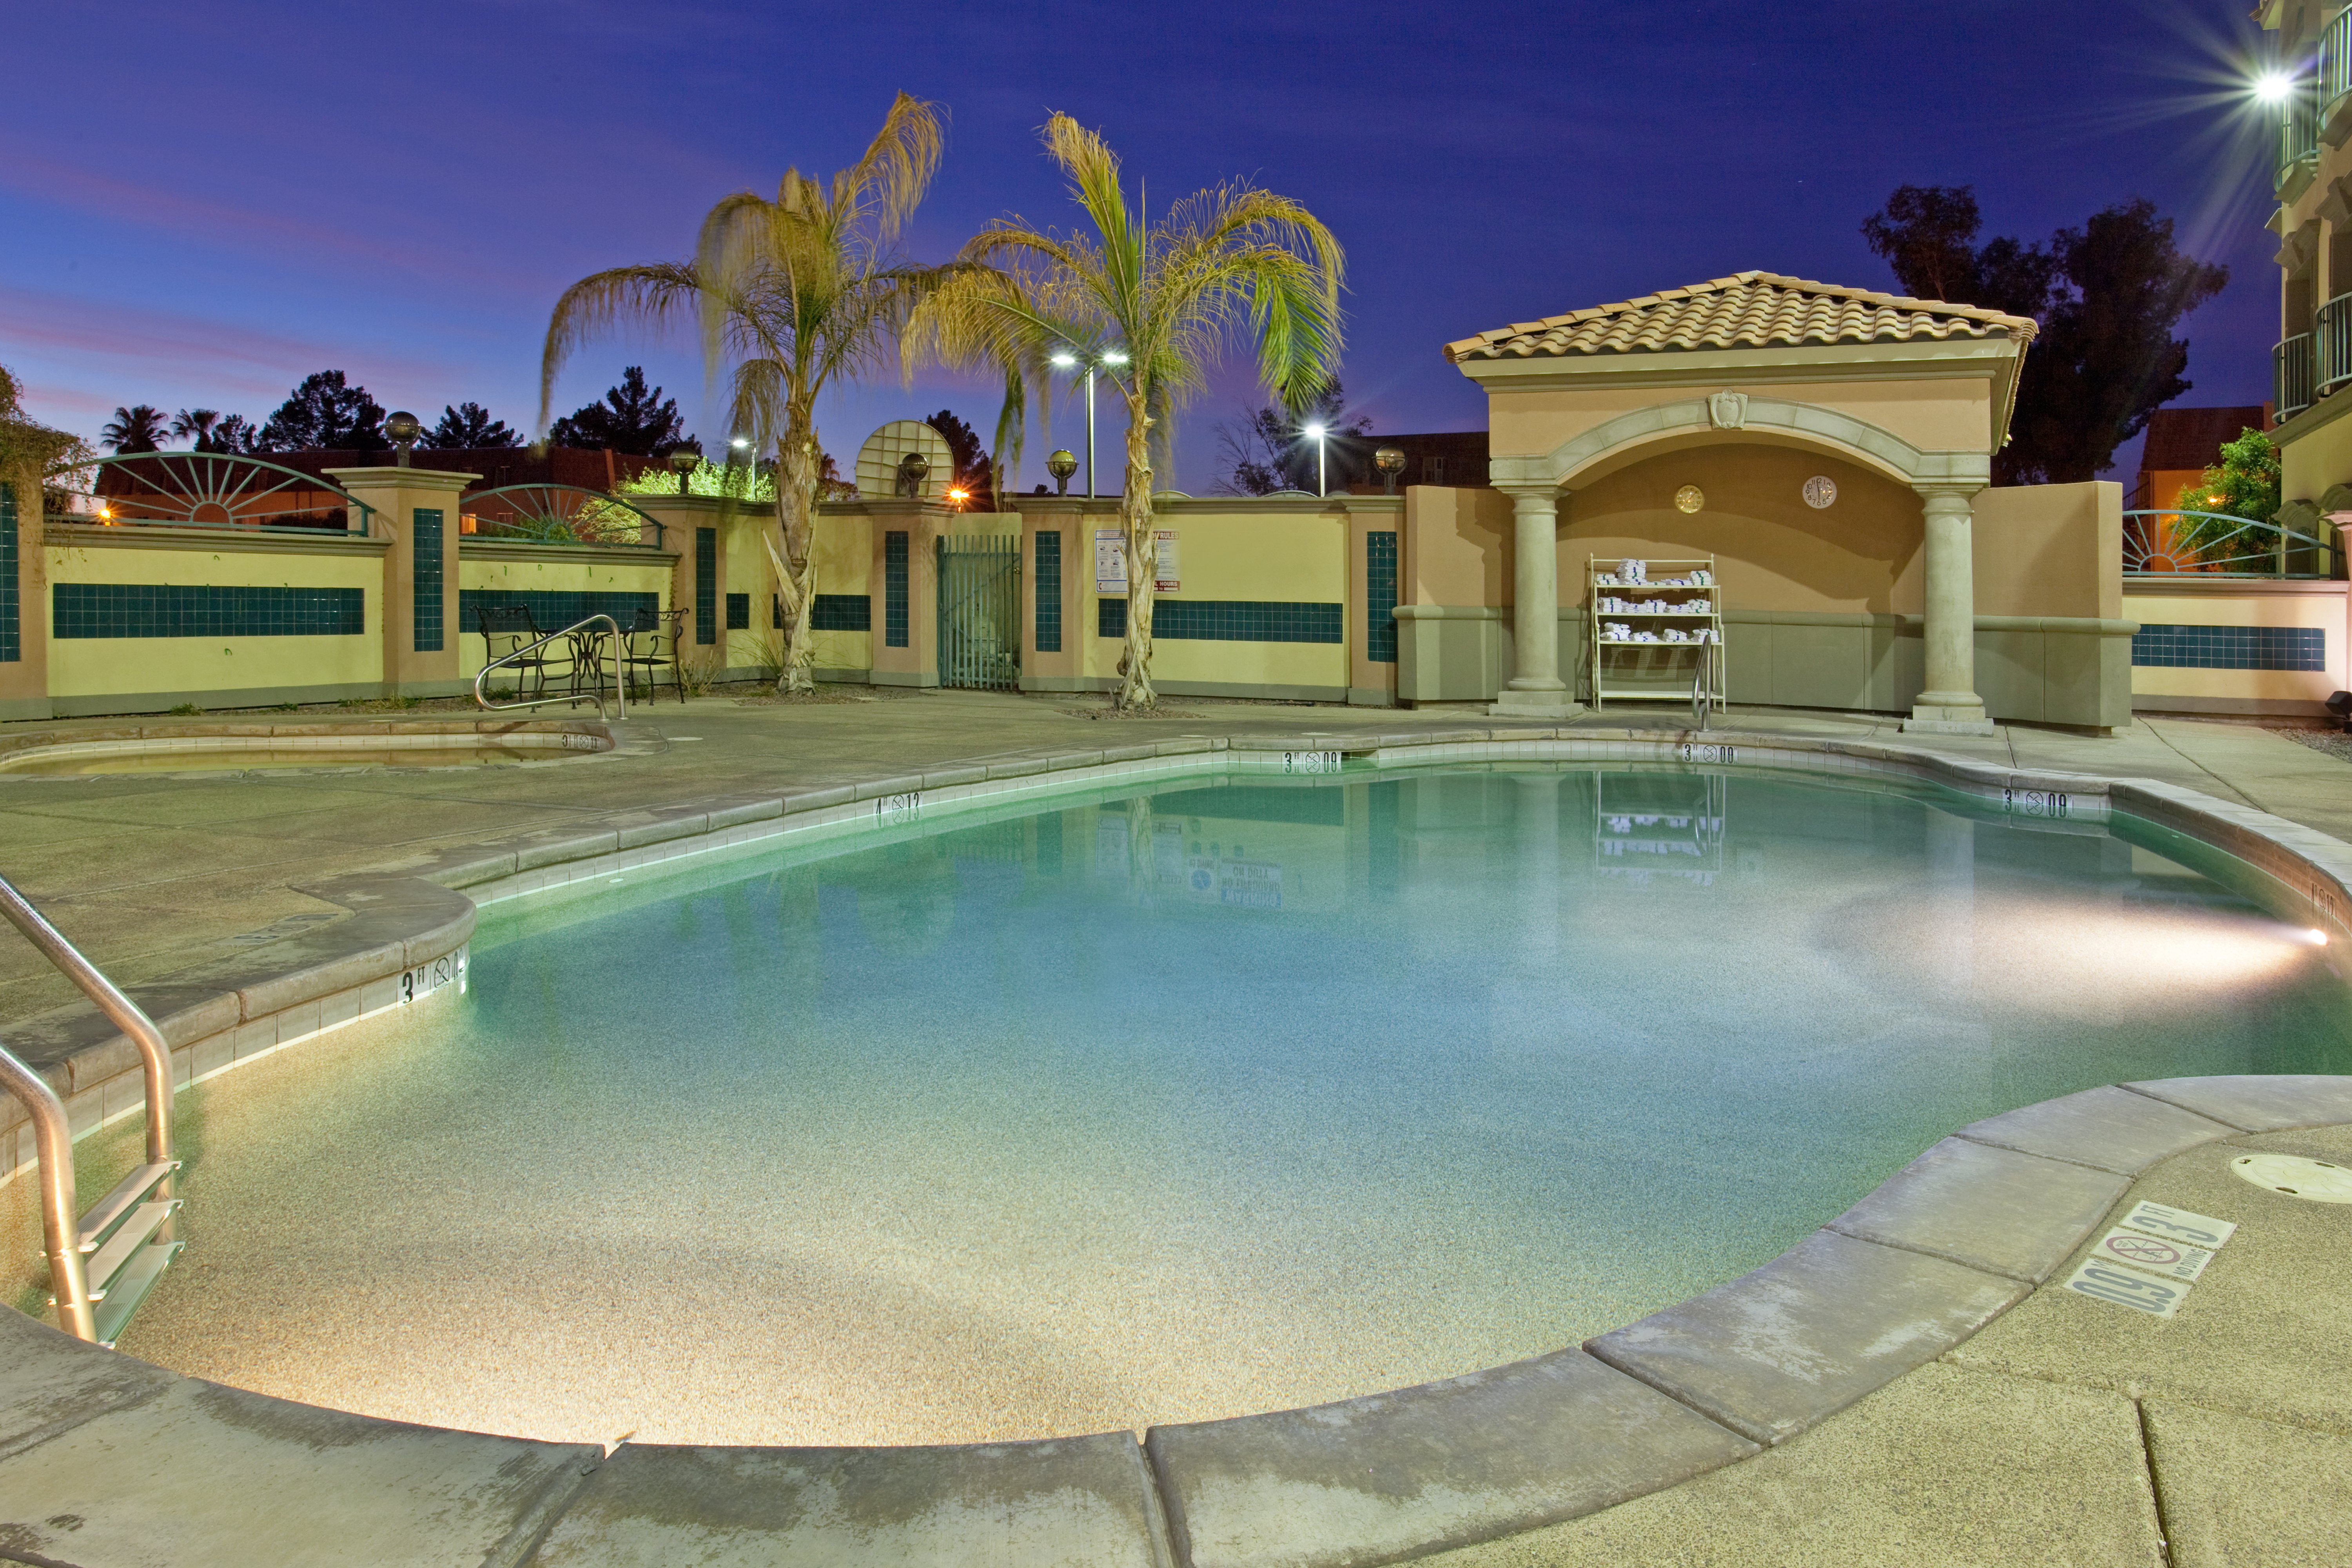 Have a morning or afternoon dip in our heated outdoor pool.